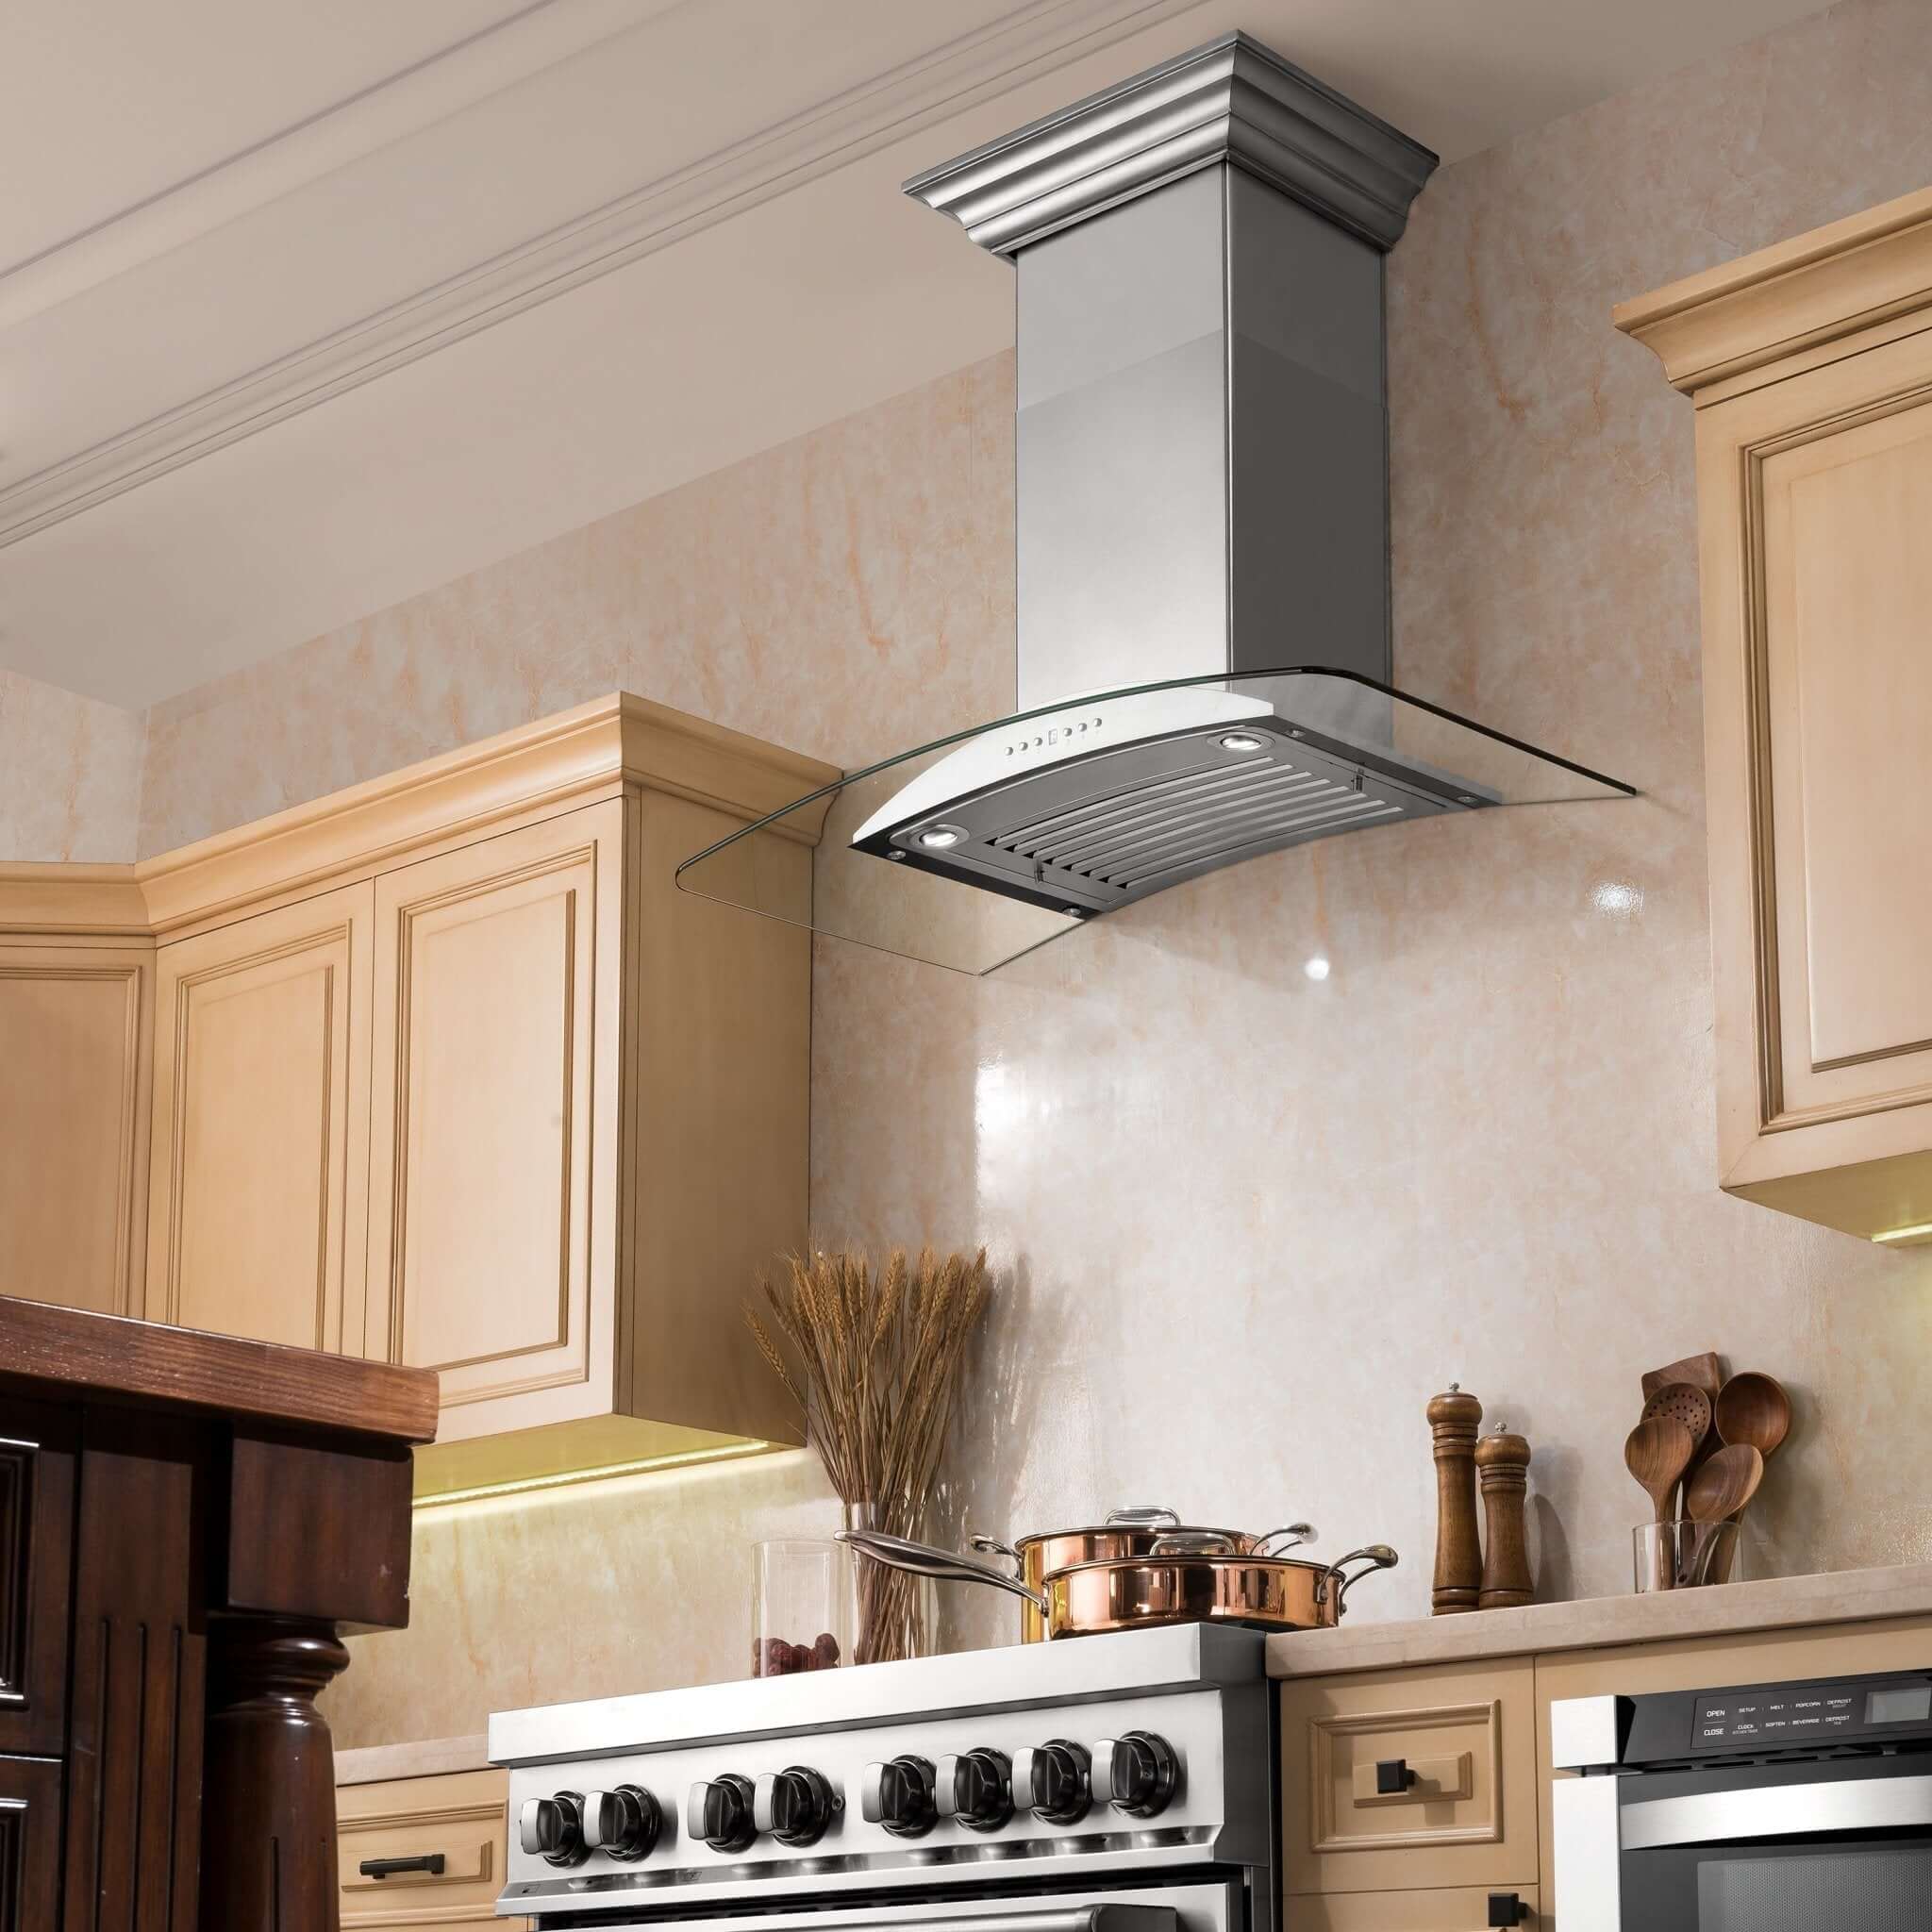 ZLINE Convertible Vent Wall Mount Range Hood in Stainless Steel & Glass (KN) in a farmhouse-style kitchen with natural wood cabinetry side under..